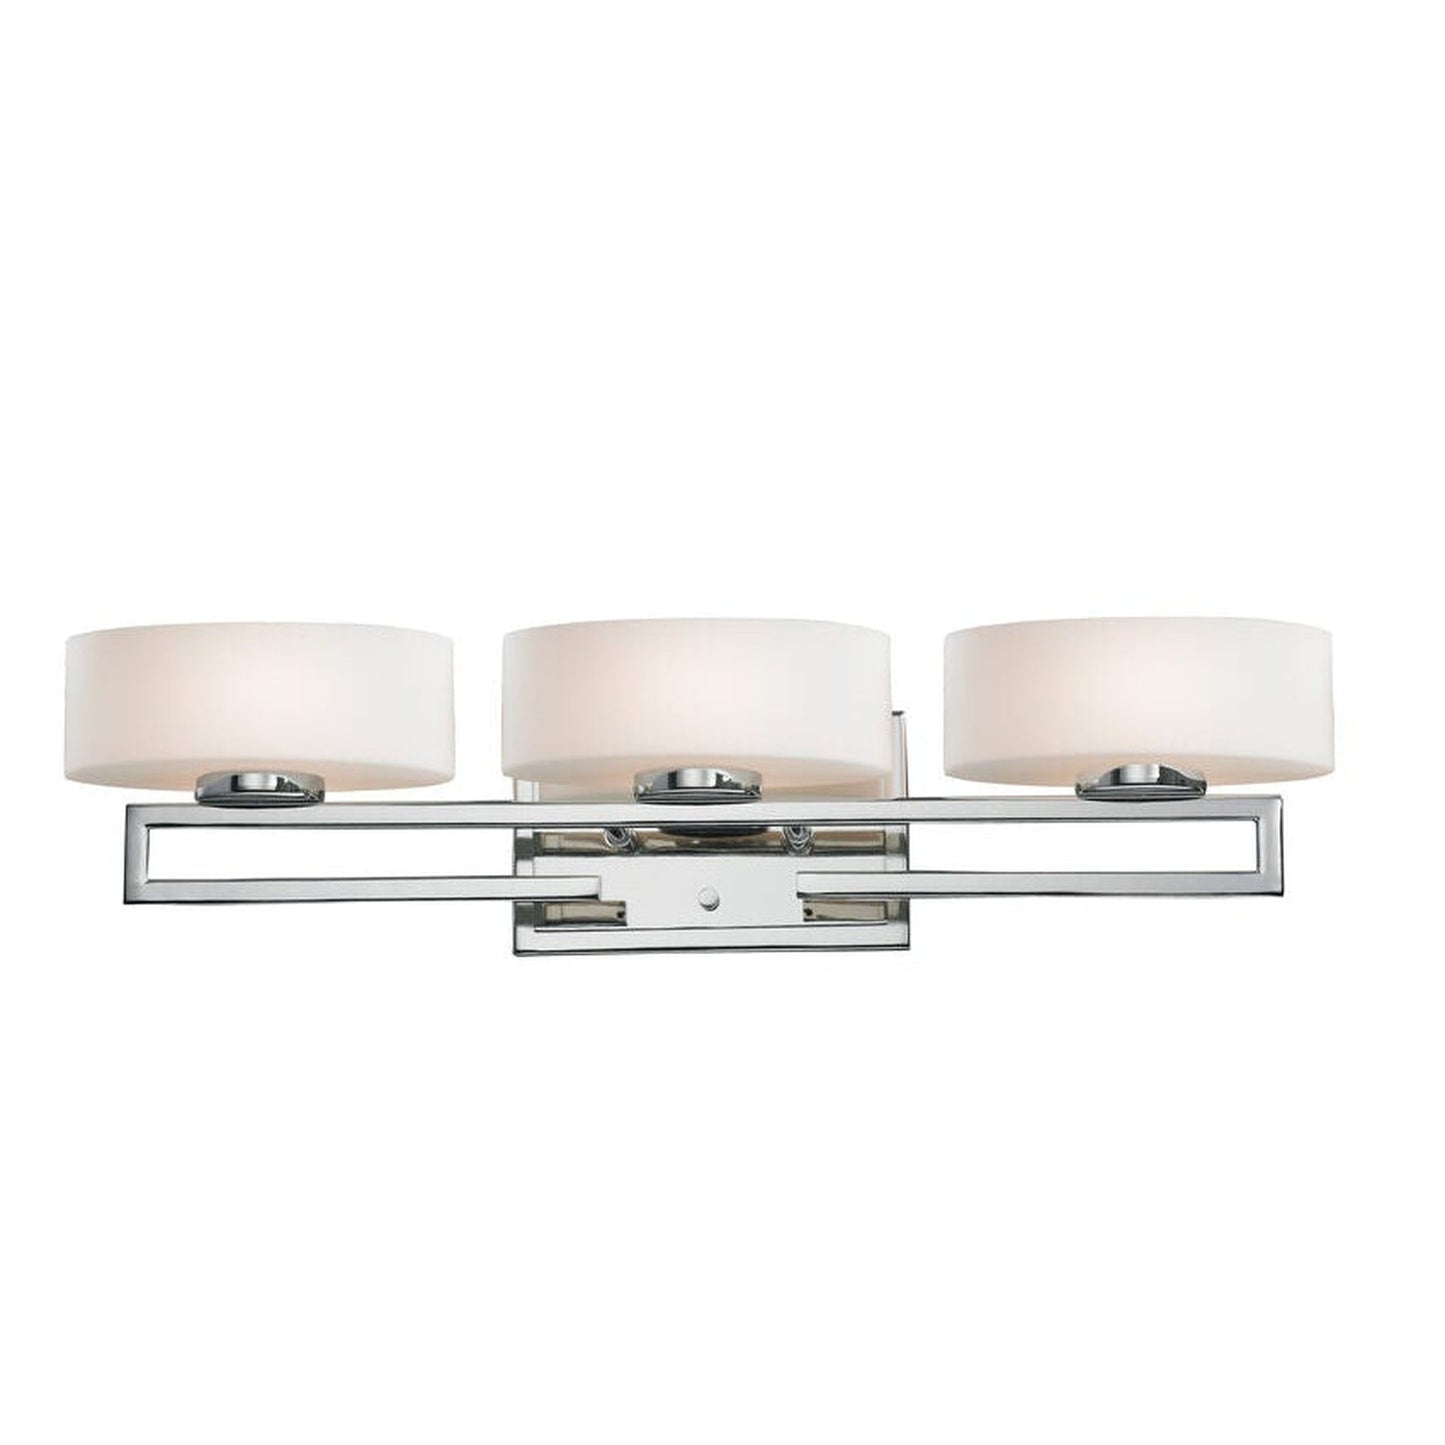 Z-Lite Cetynia 24" 3-Light Chrome Vanity Light With Matte Opal Shade